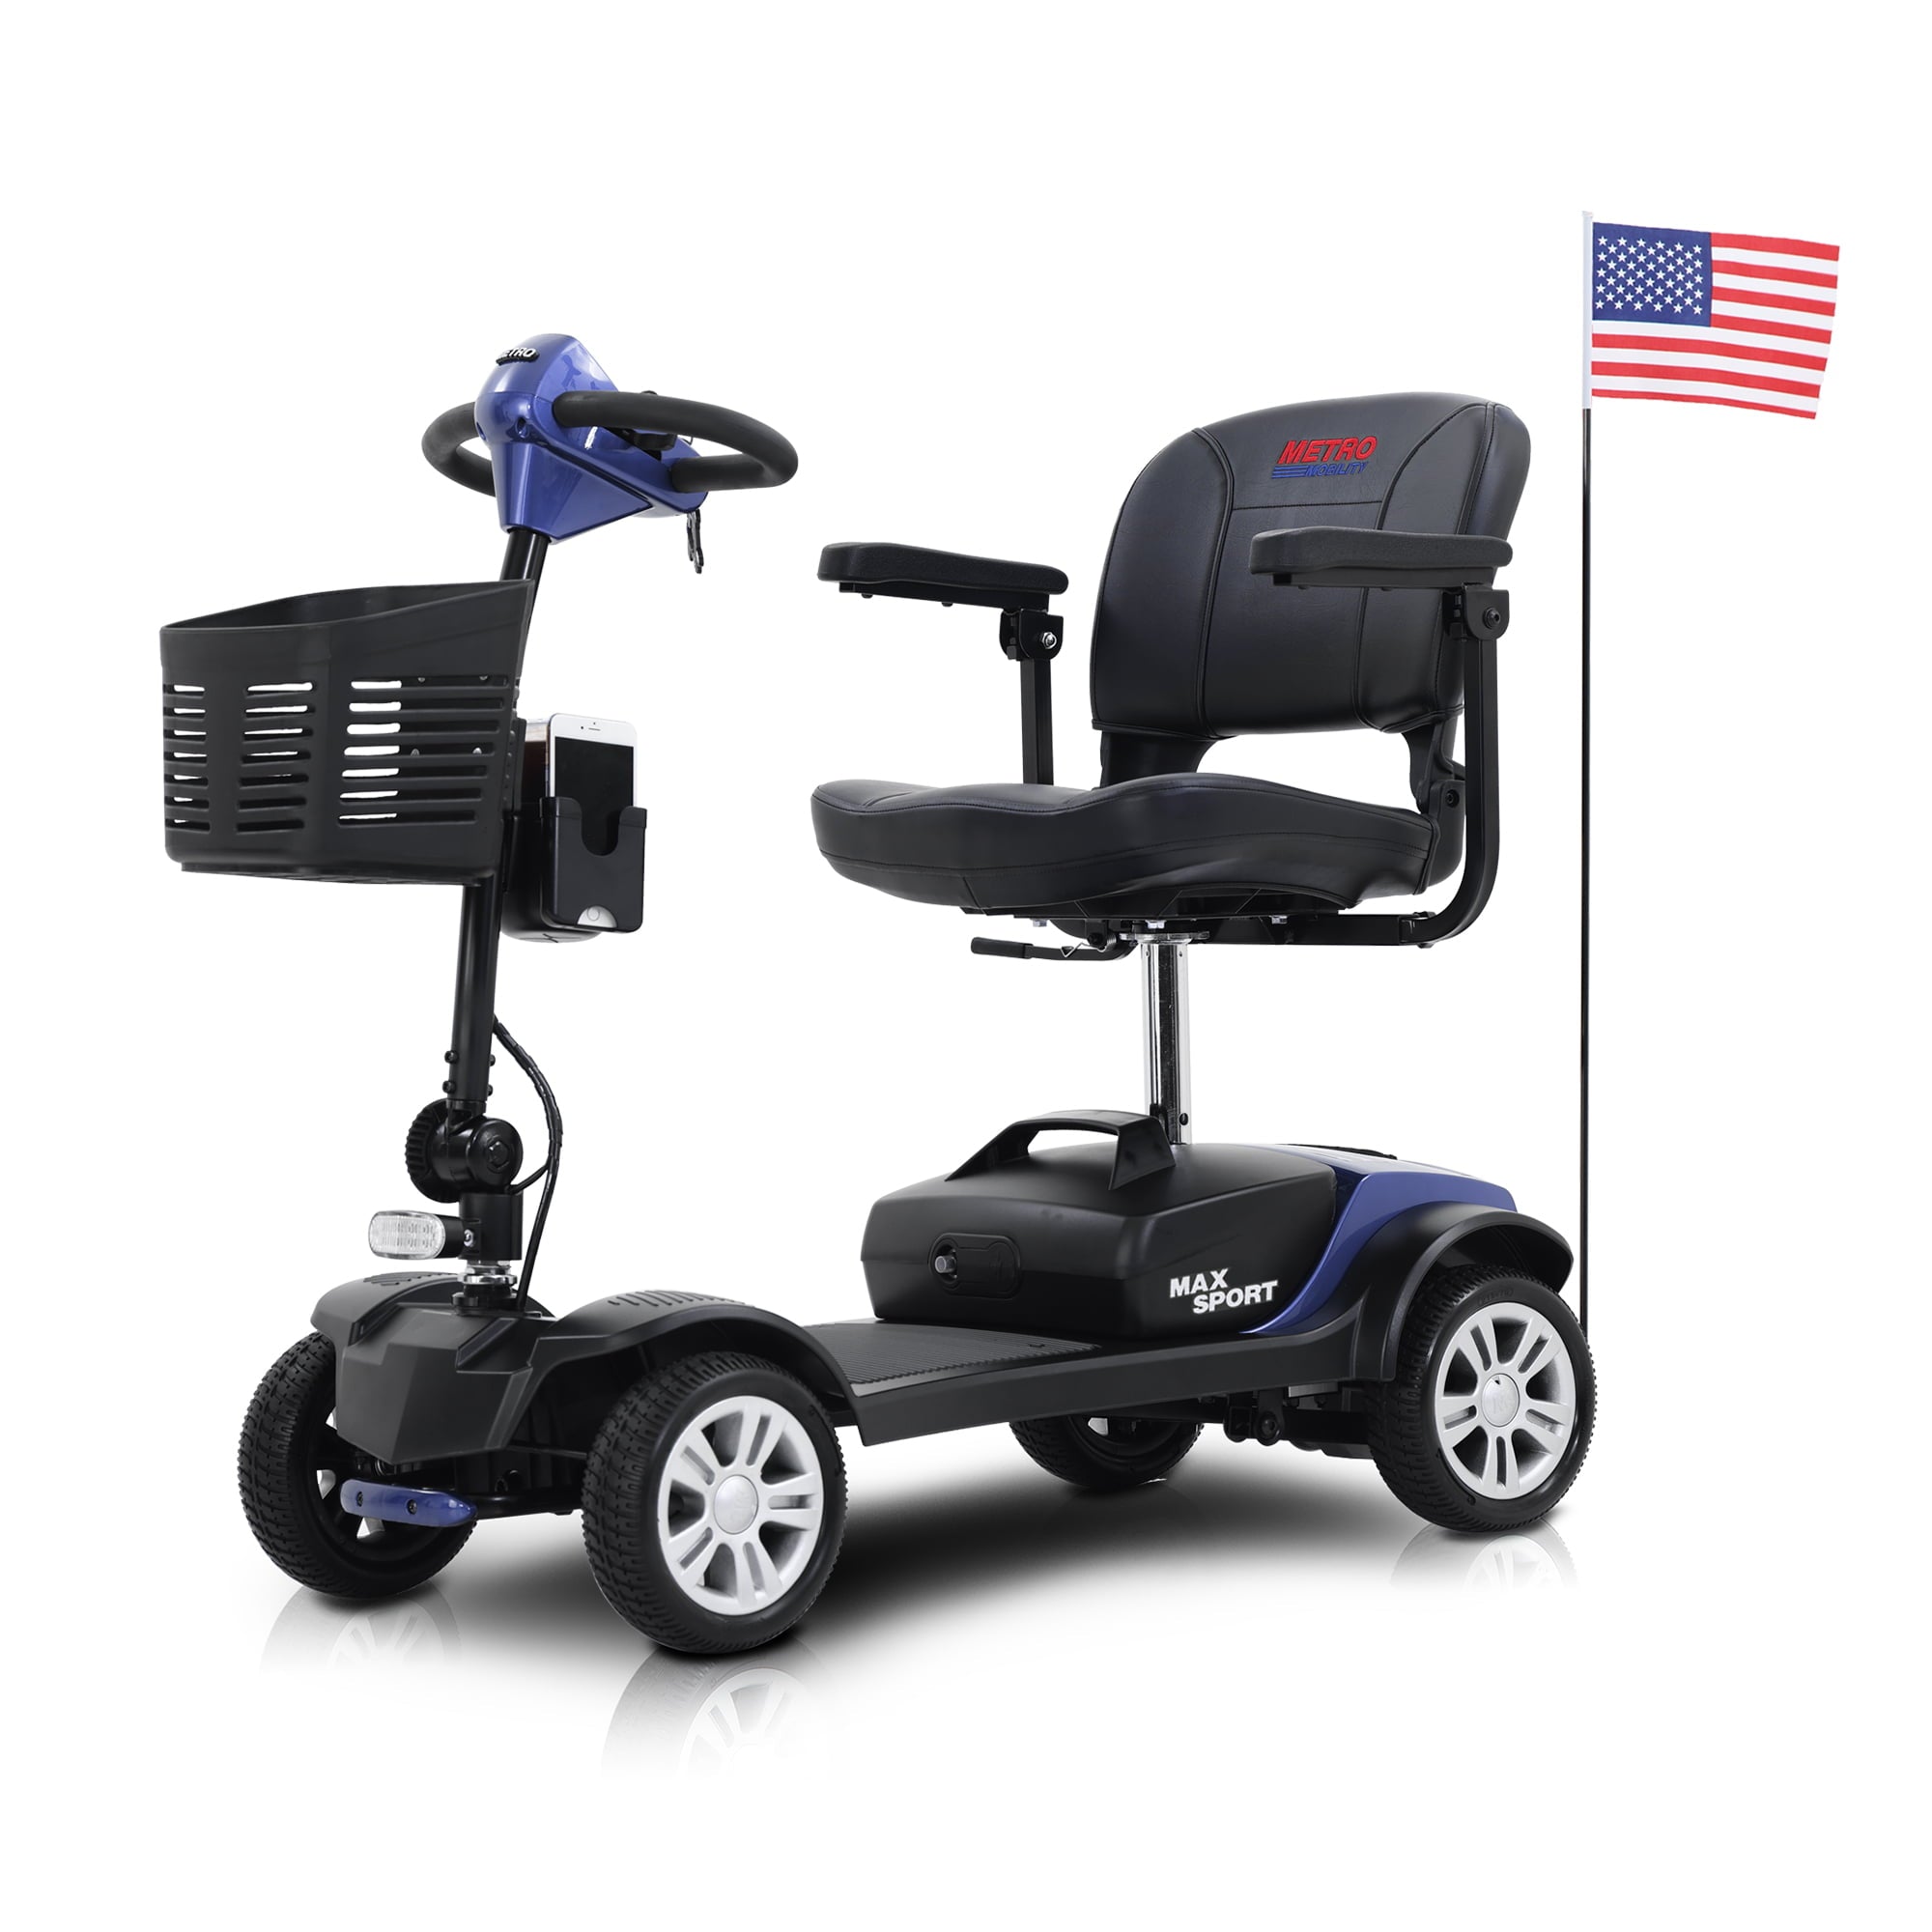 ametoys SPORT BLUE 4 Wheels Outdoor Compact Mobility Scooter with 2 in 1 Cup & Phone Holder